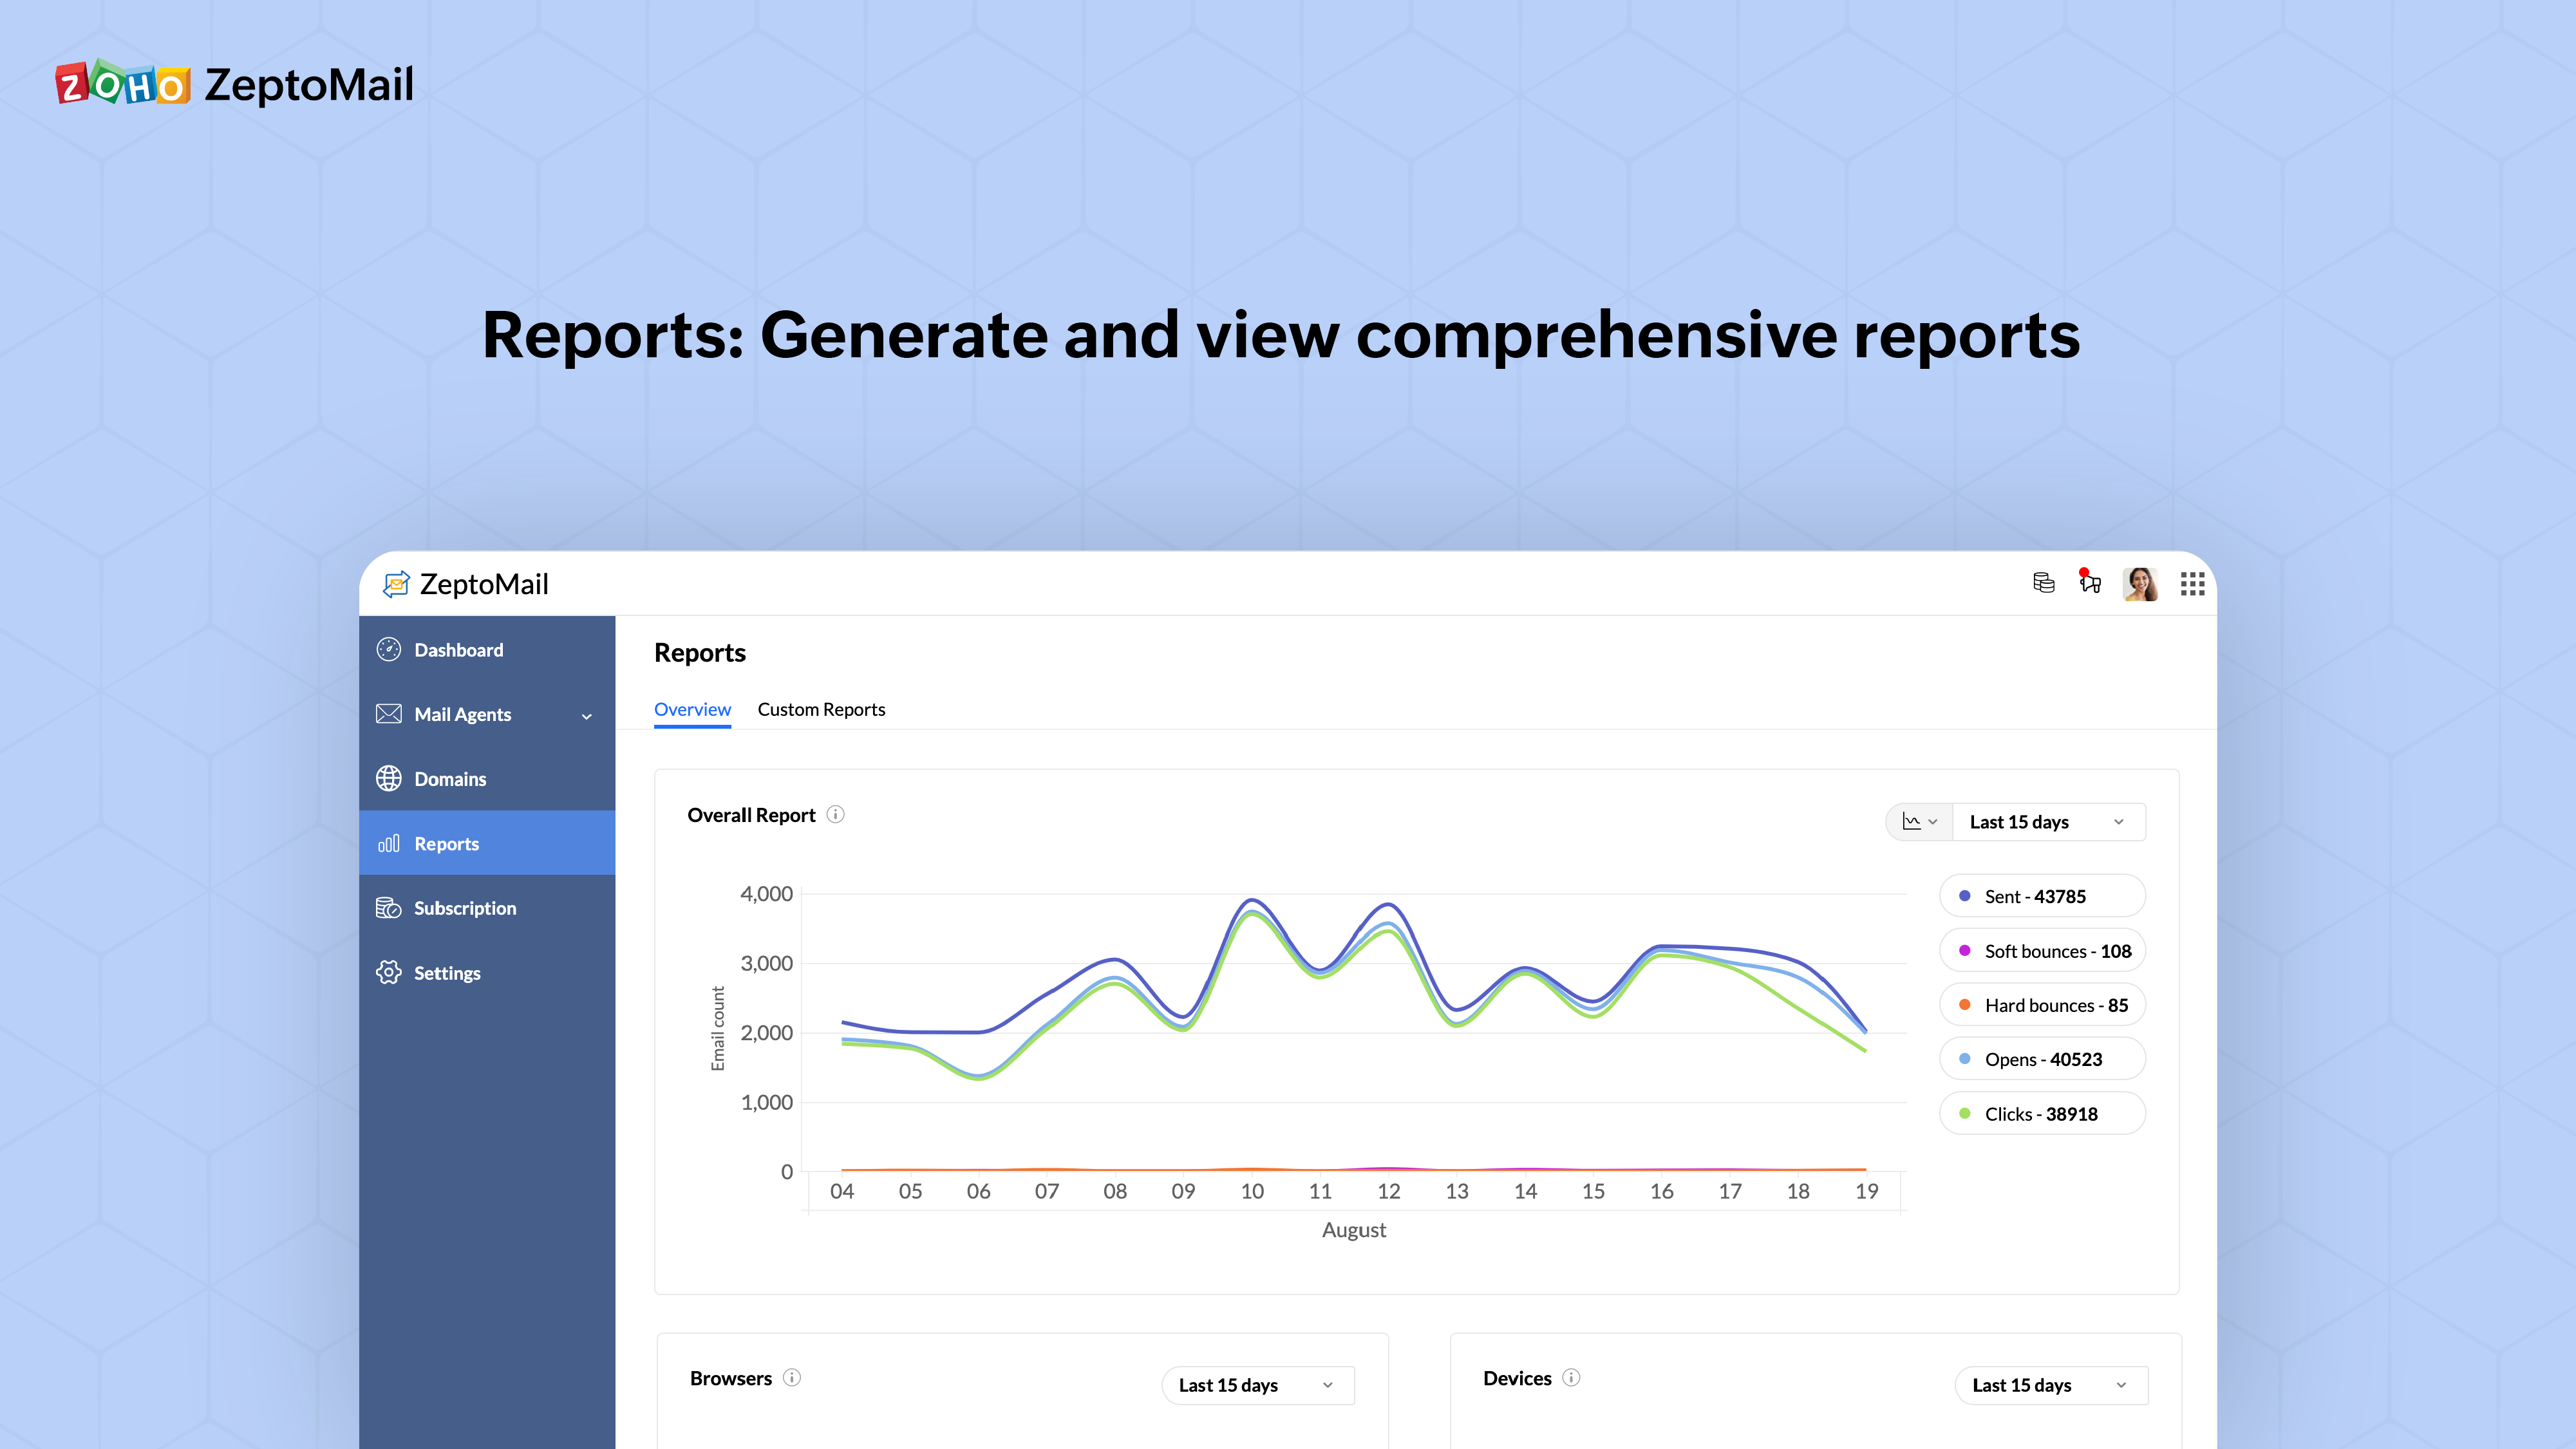 Zeptomail Reports: Generate and view comprehensive reports